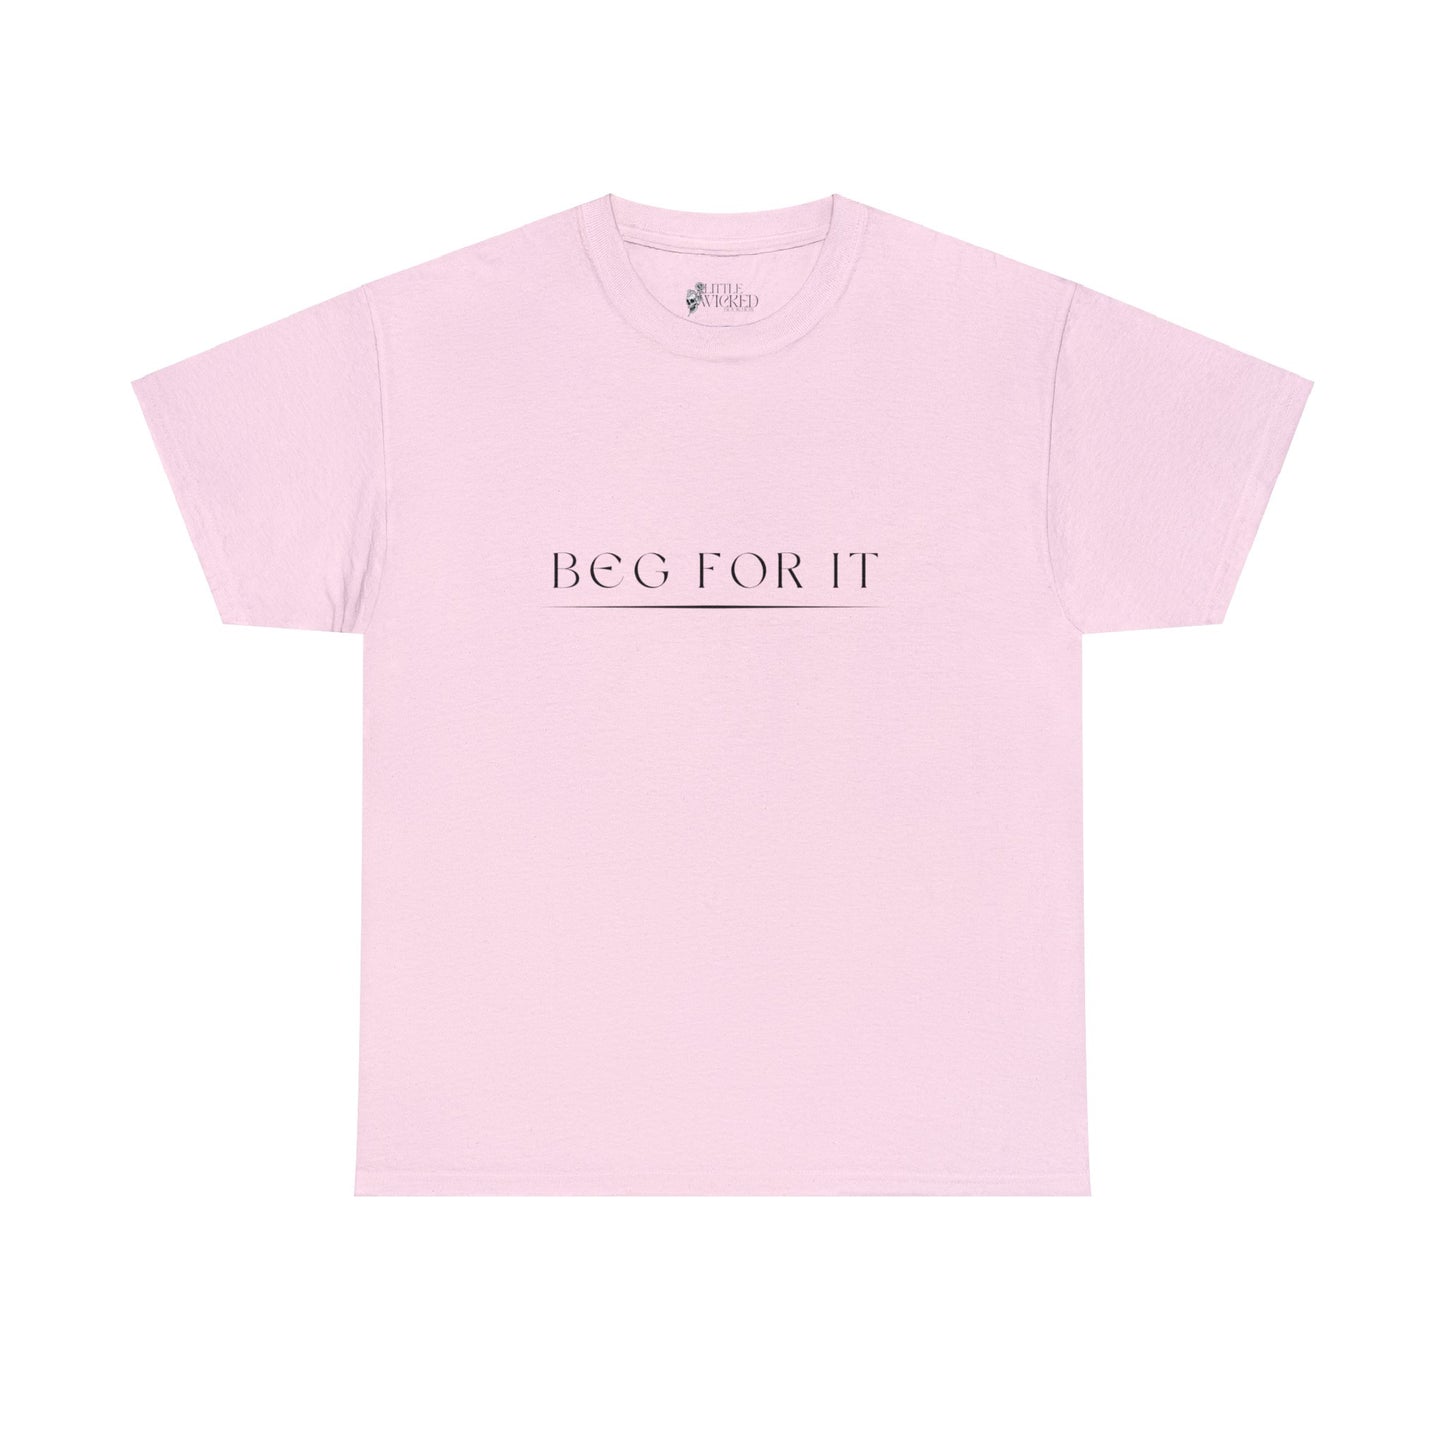 Beg For It Tee Shirt